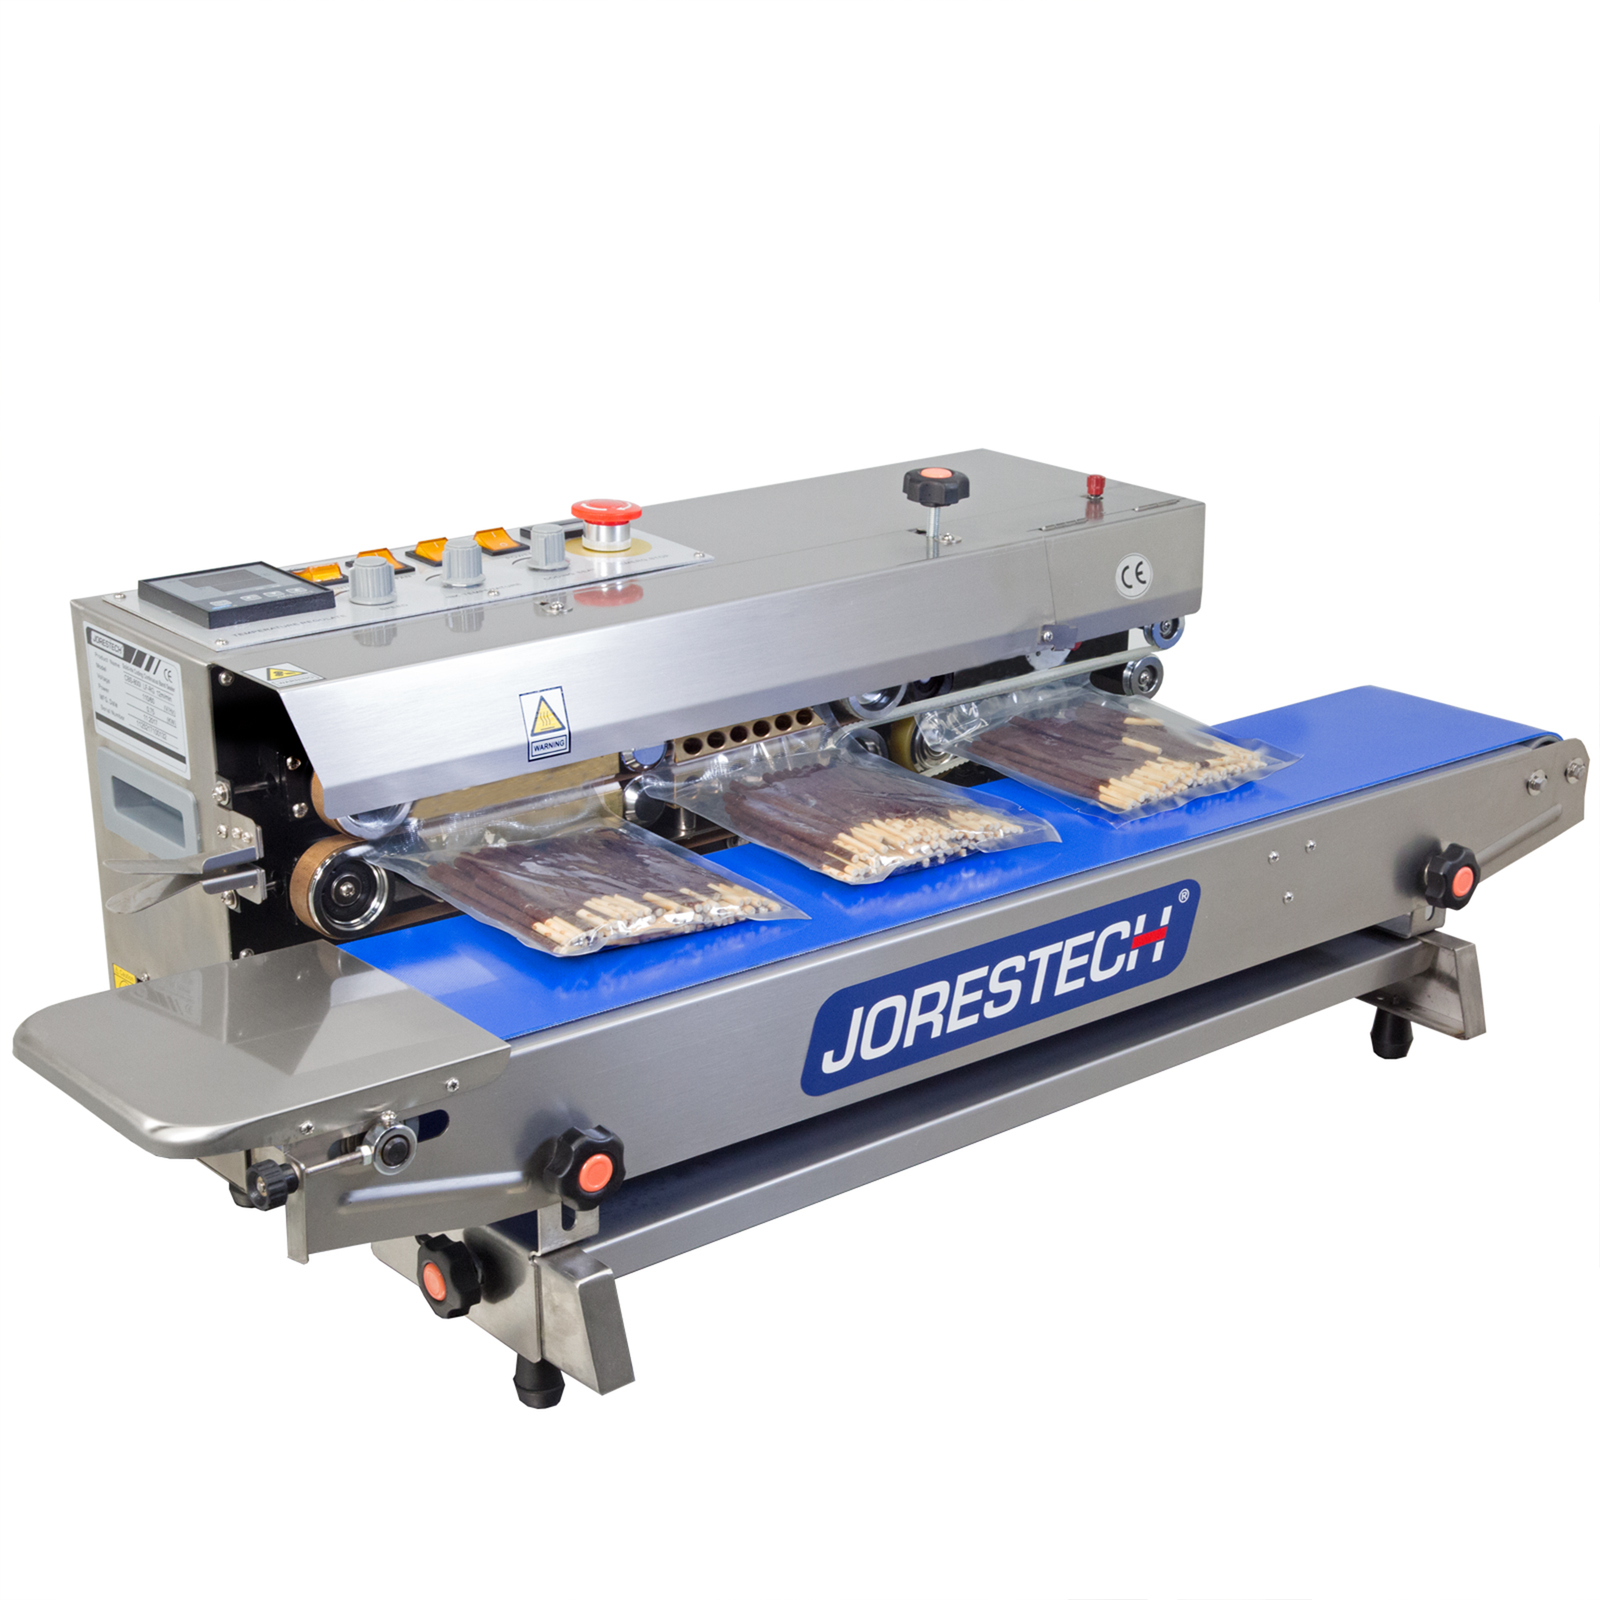 Image shows a JORESTECH horizontal continuous band sealing machine sealing plastic bags with product inside